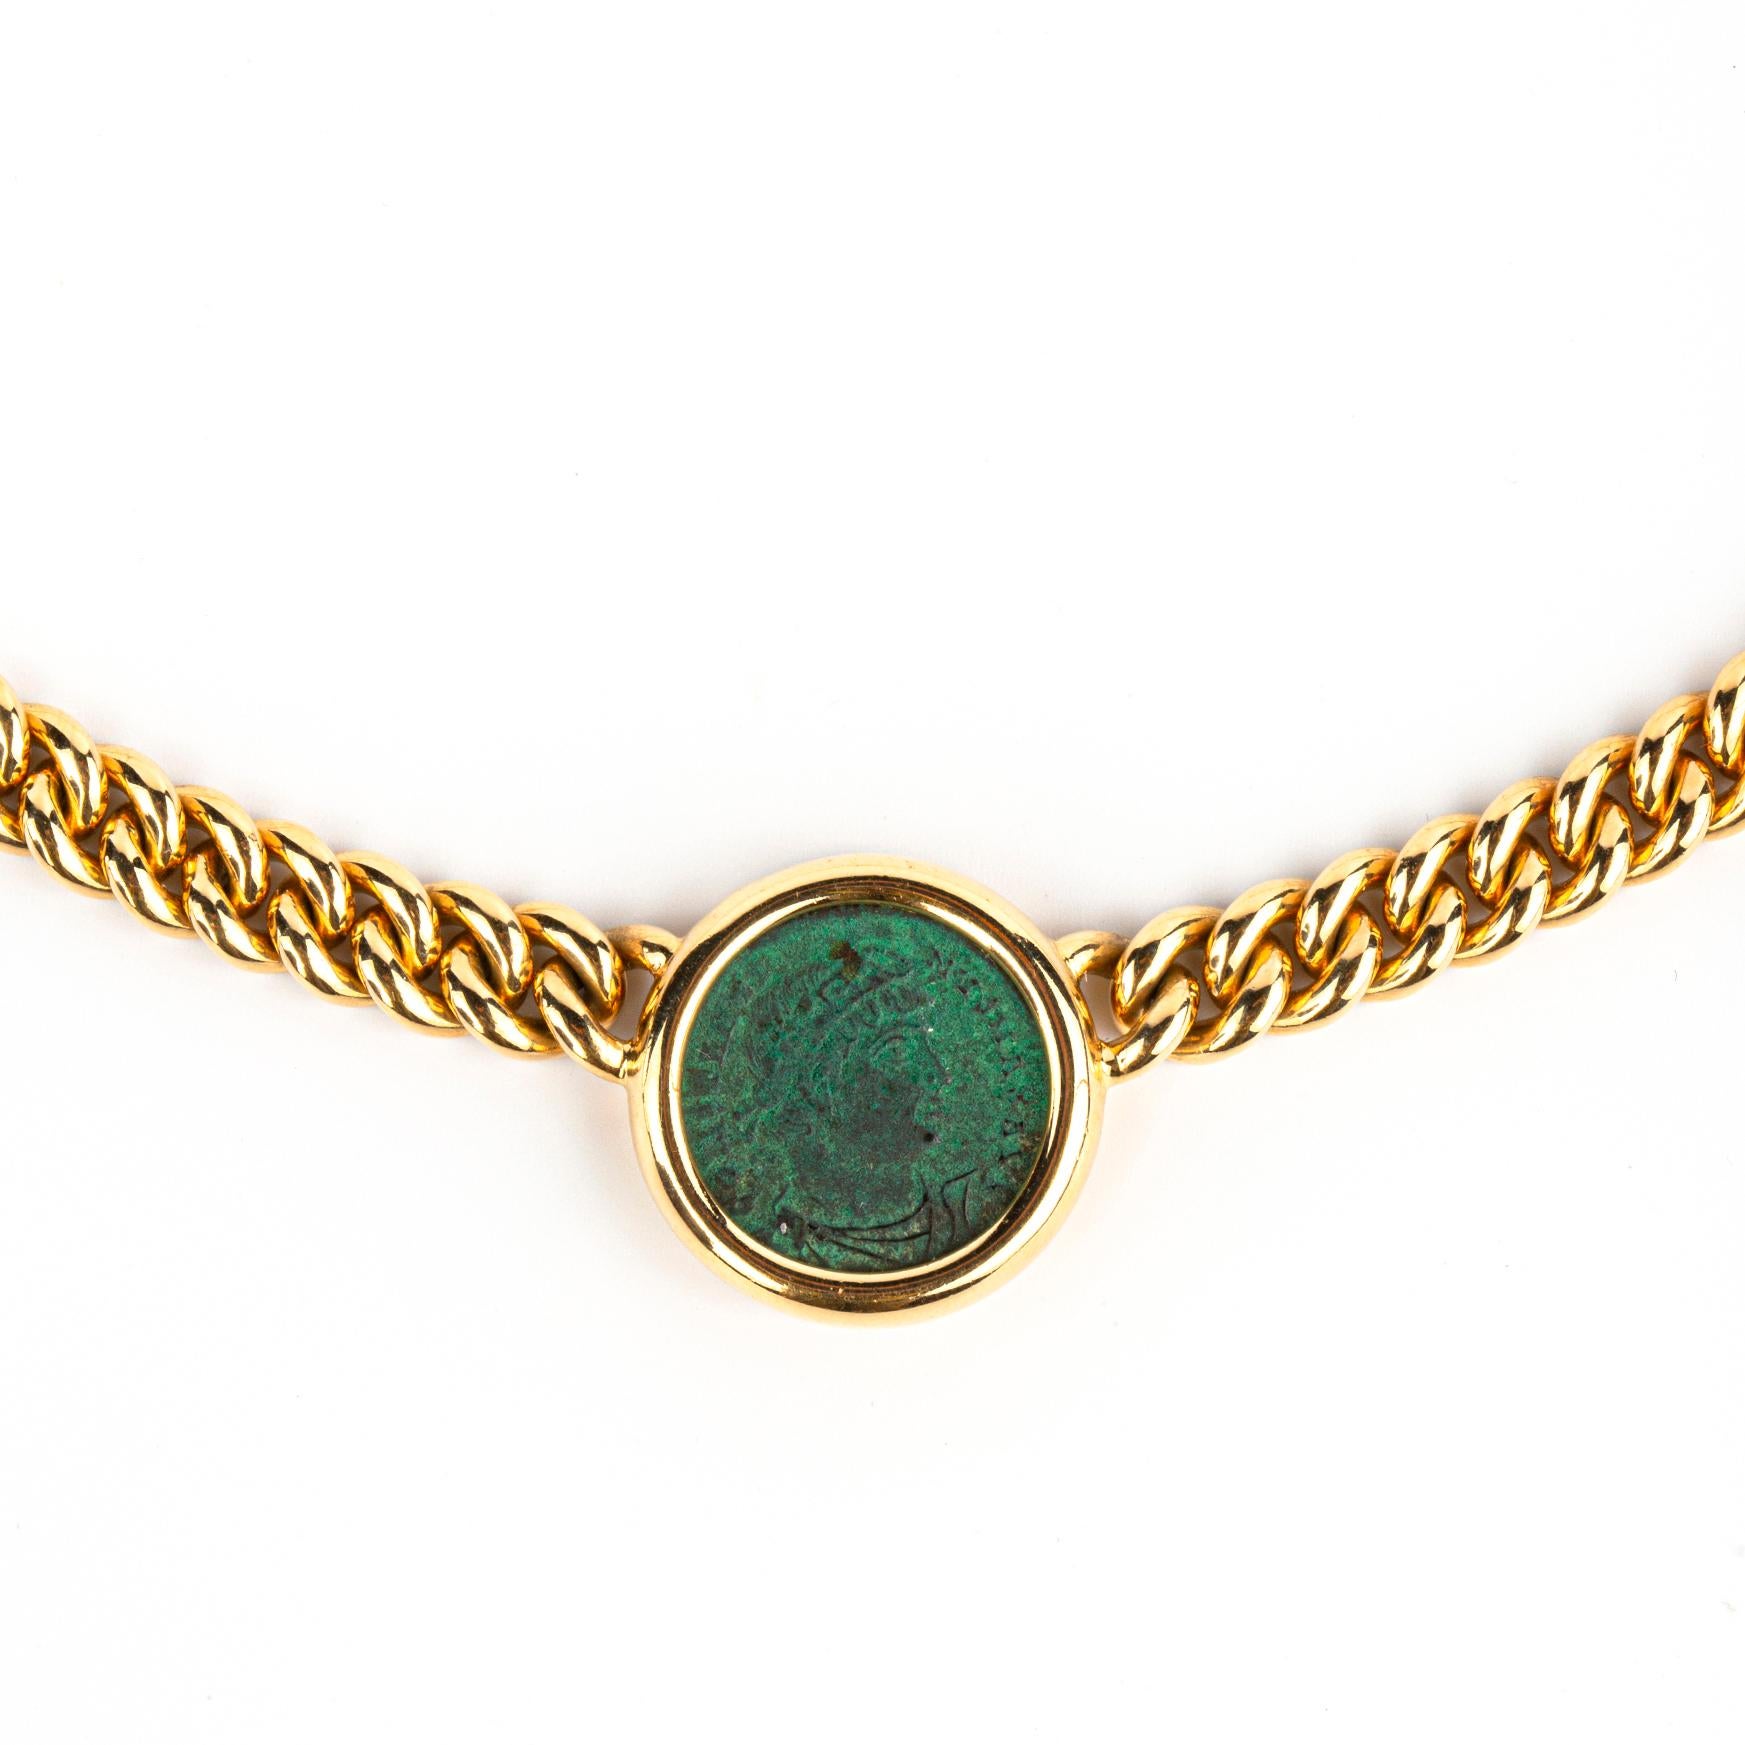 Bulgari 18k yellow gold & ancient coin ‘Monete’ necklace with the inscription “Alexandria Constantinus AD 306 337”. Made in Italy, circa 1980.